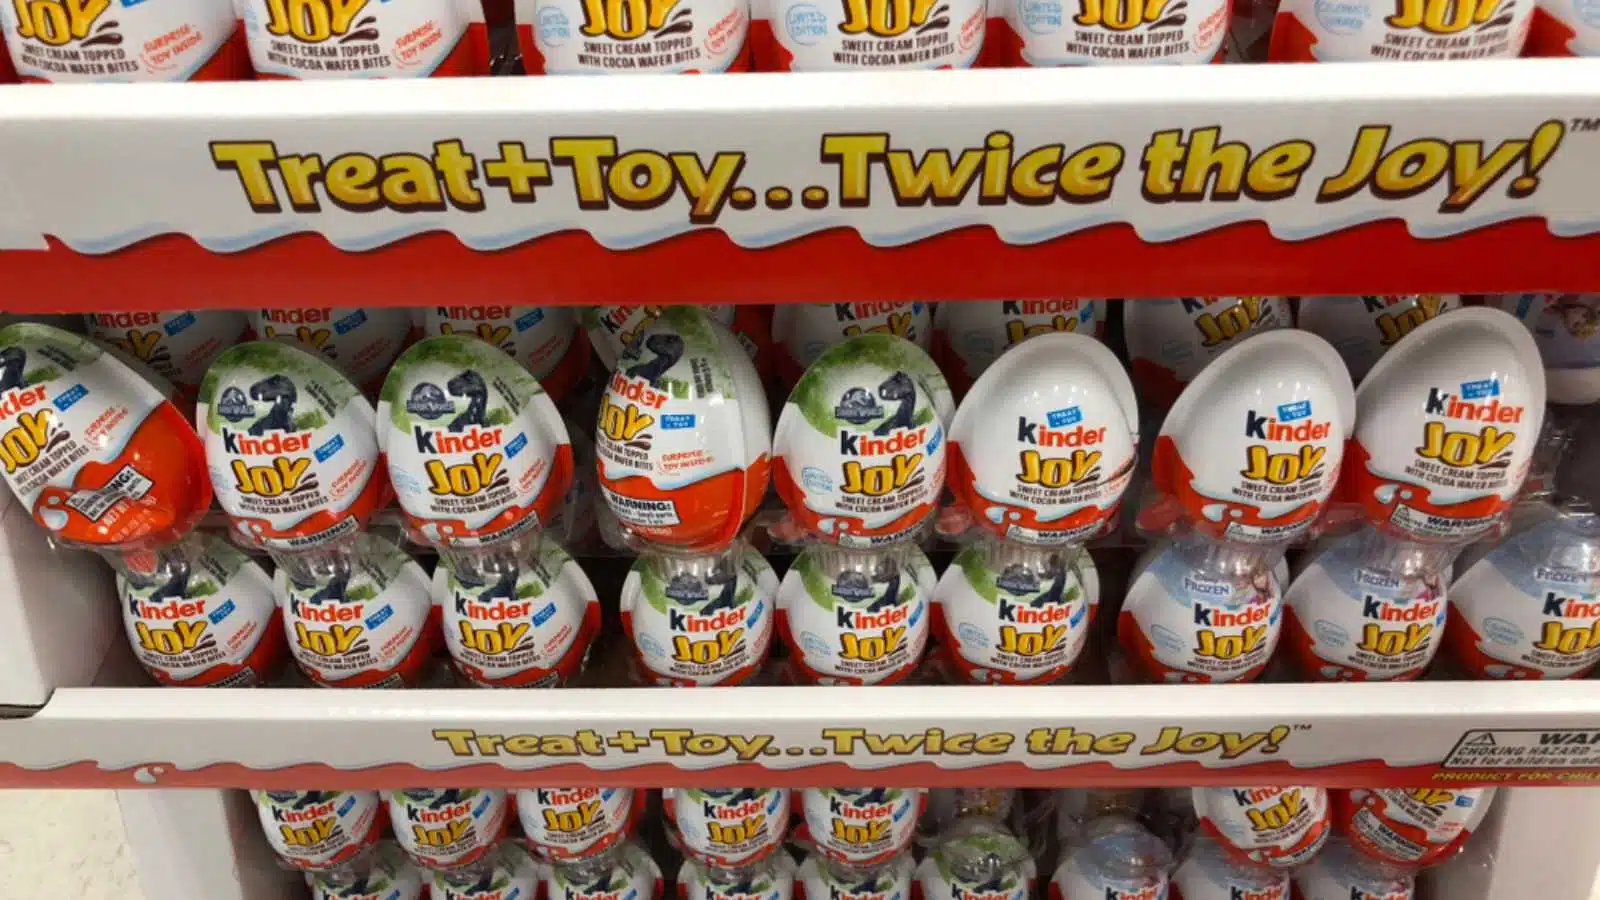 JUNE 13 2018 - MINNEAPOLIS, MN: Kinder Egg Surprise toy for kids on display at a Target grocery store. These candies were banned in the United States.